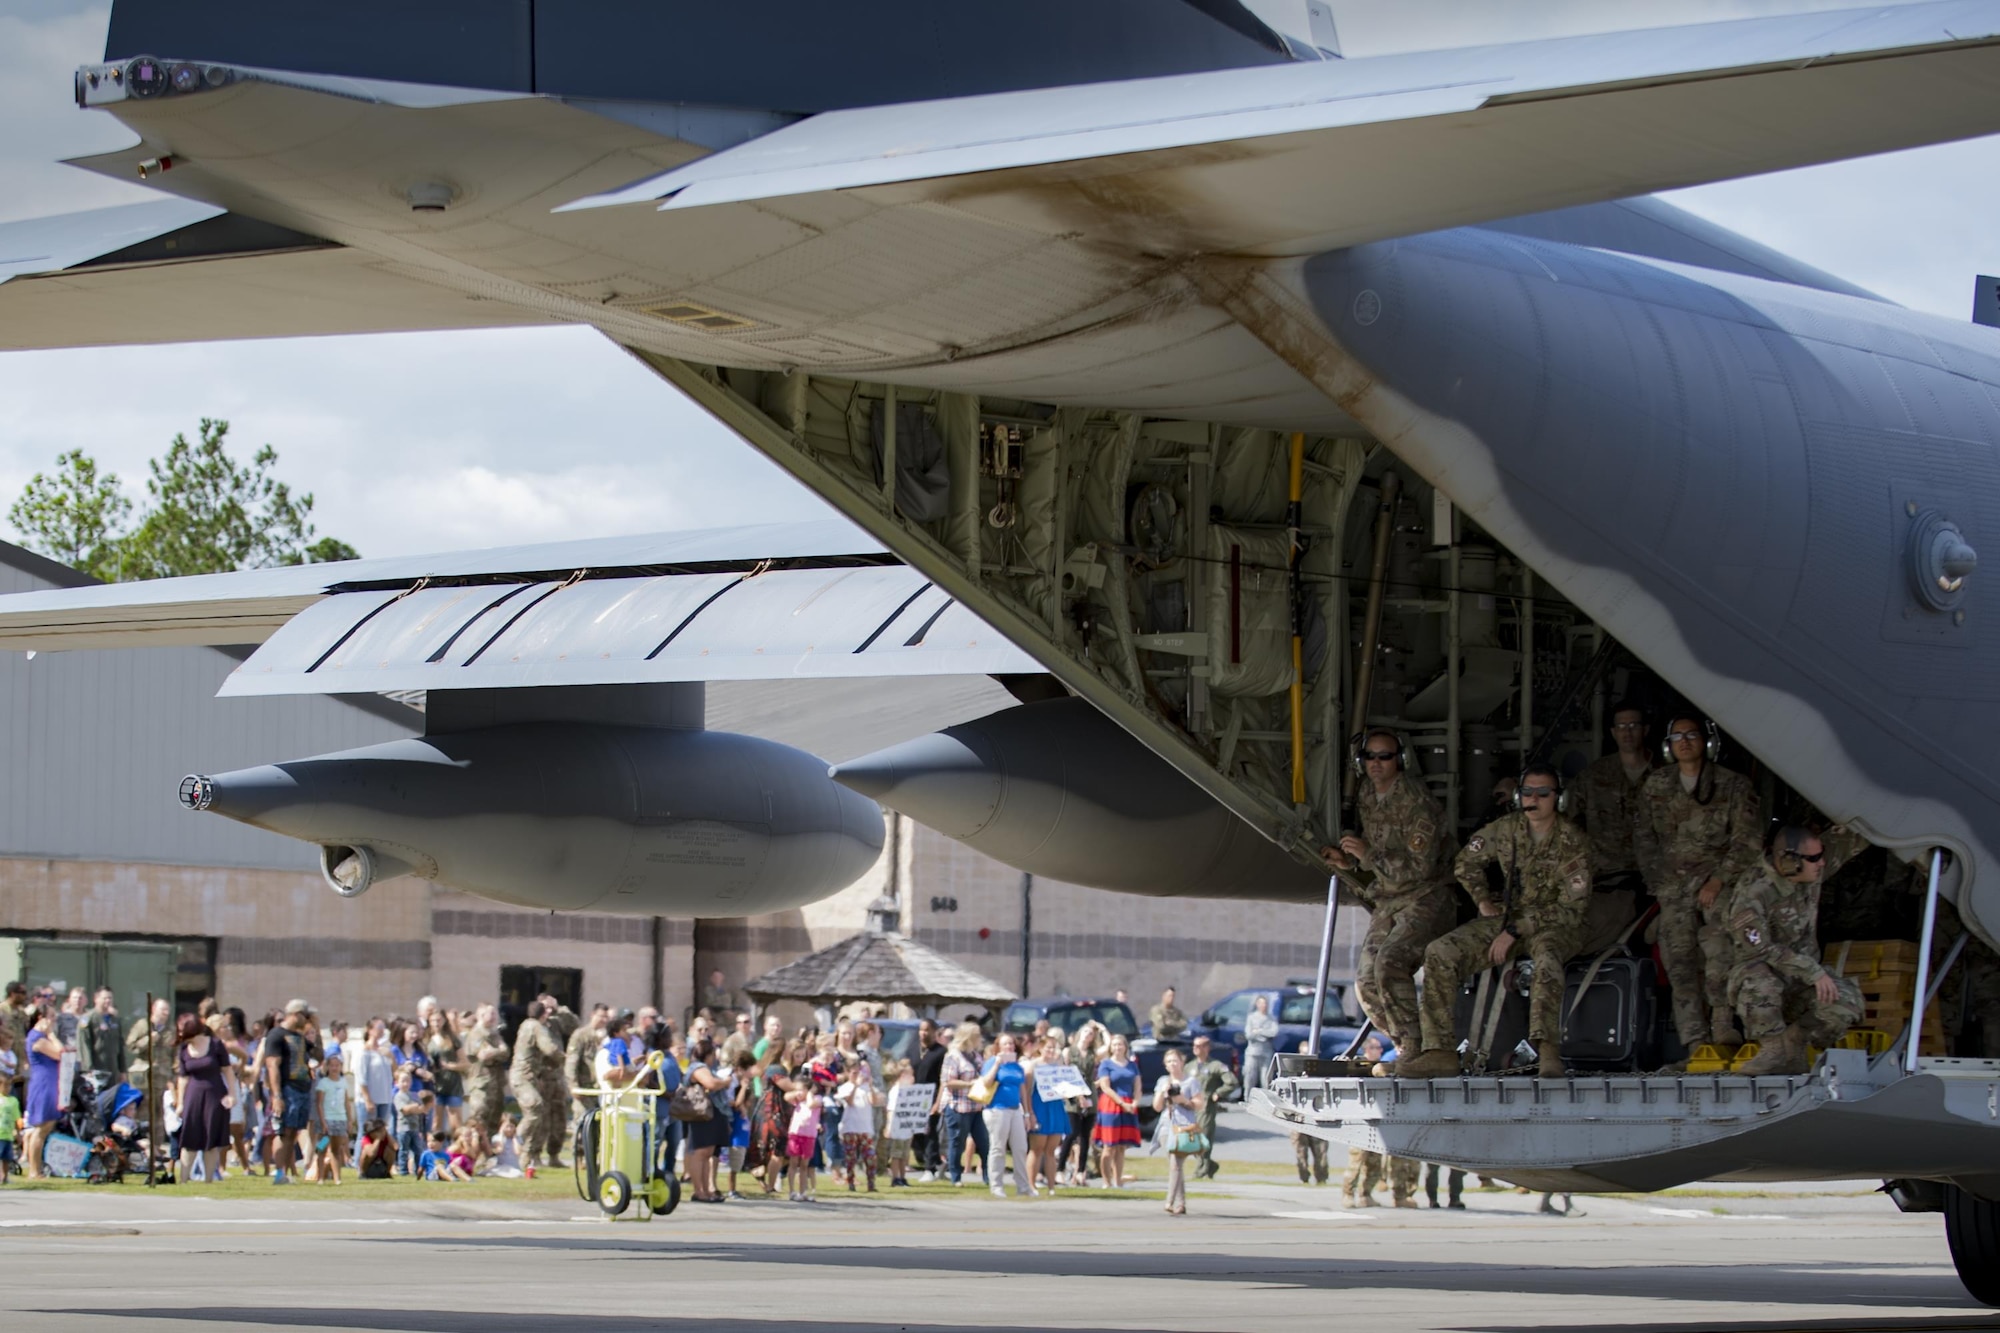 A 71st Squadron (RQS) HC-130J Combat King II taxis while Airmen and families wait to greet loved ones during a redeployment, Oct. 6, 2017, at Moody Air Force Base, Ga. Airmen from the 71st RQS supported deployed operations by providing expeditionary personnel with on-call recovery forces should they need rescued. (U.S. Air Force photo by Airman 1st Class Daniel Snider)